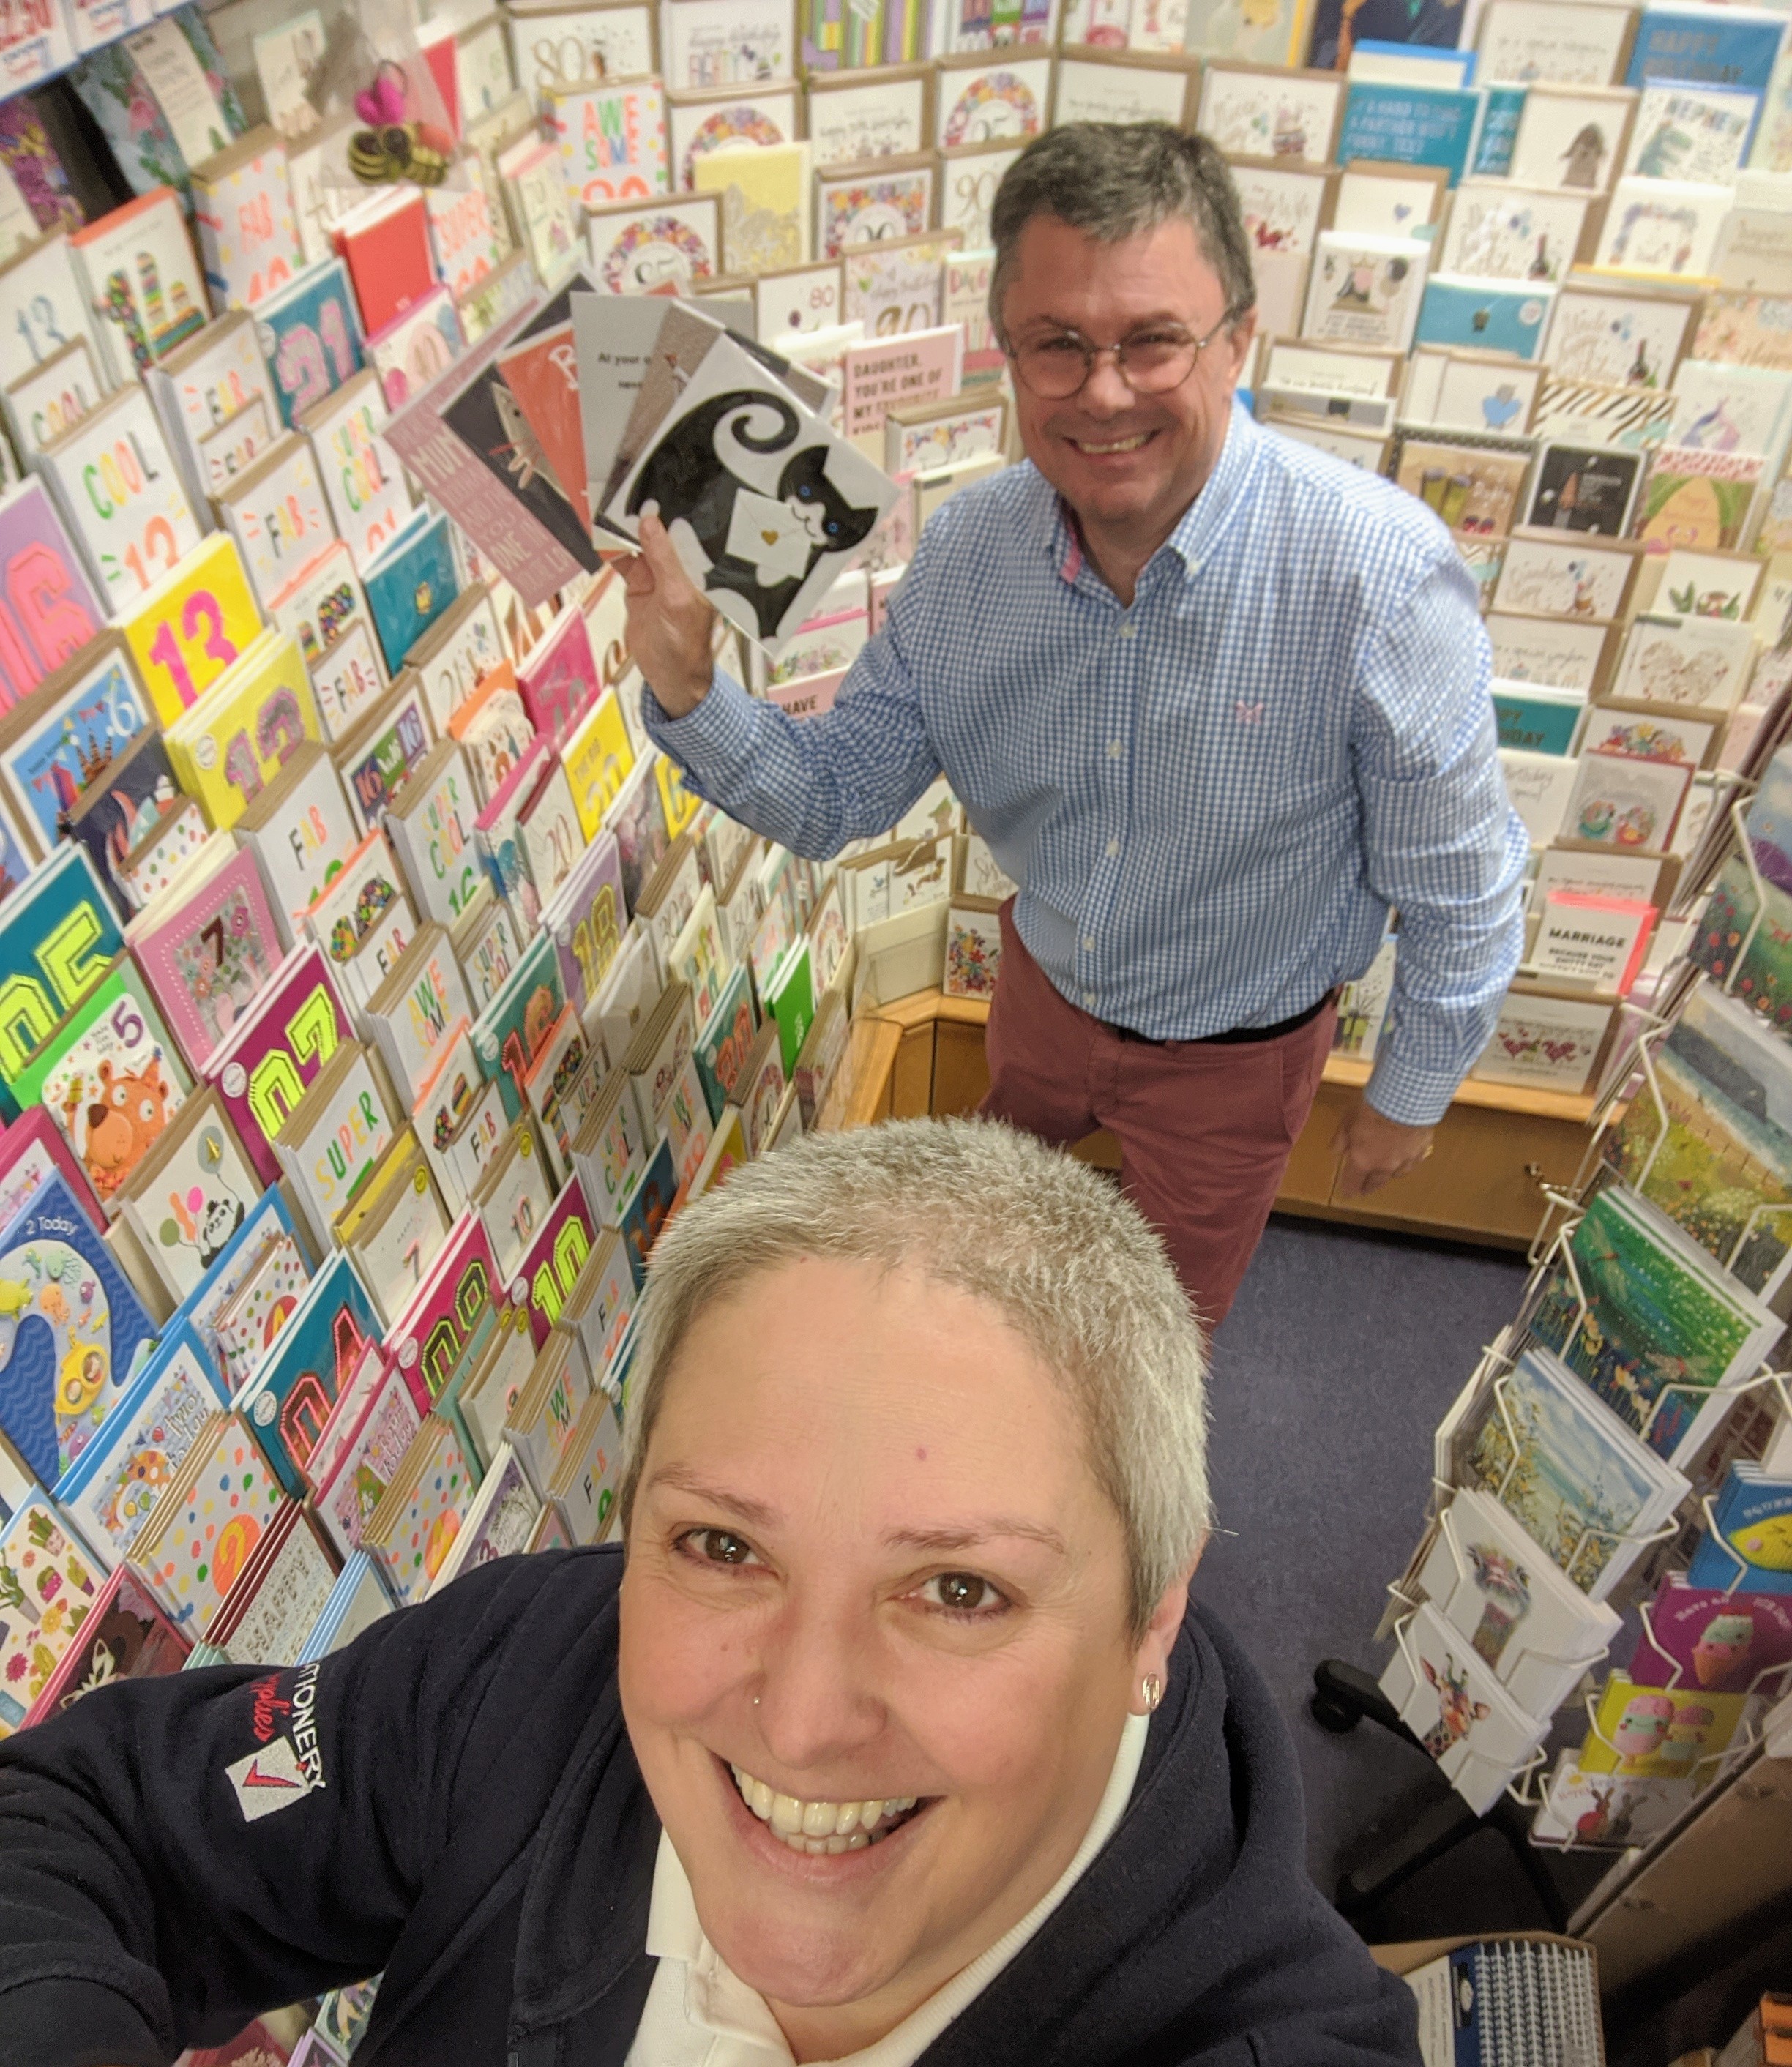 Above: Nigel Willcock, now an agent during a recent socially distanced appointment with Sarah Laker of Marple Stationery Supplies.